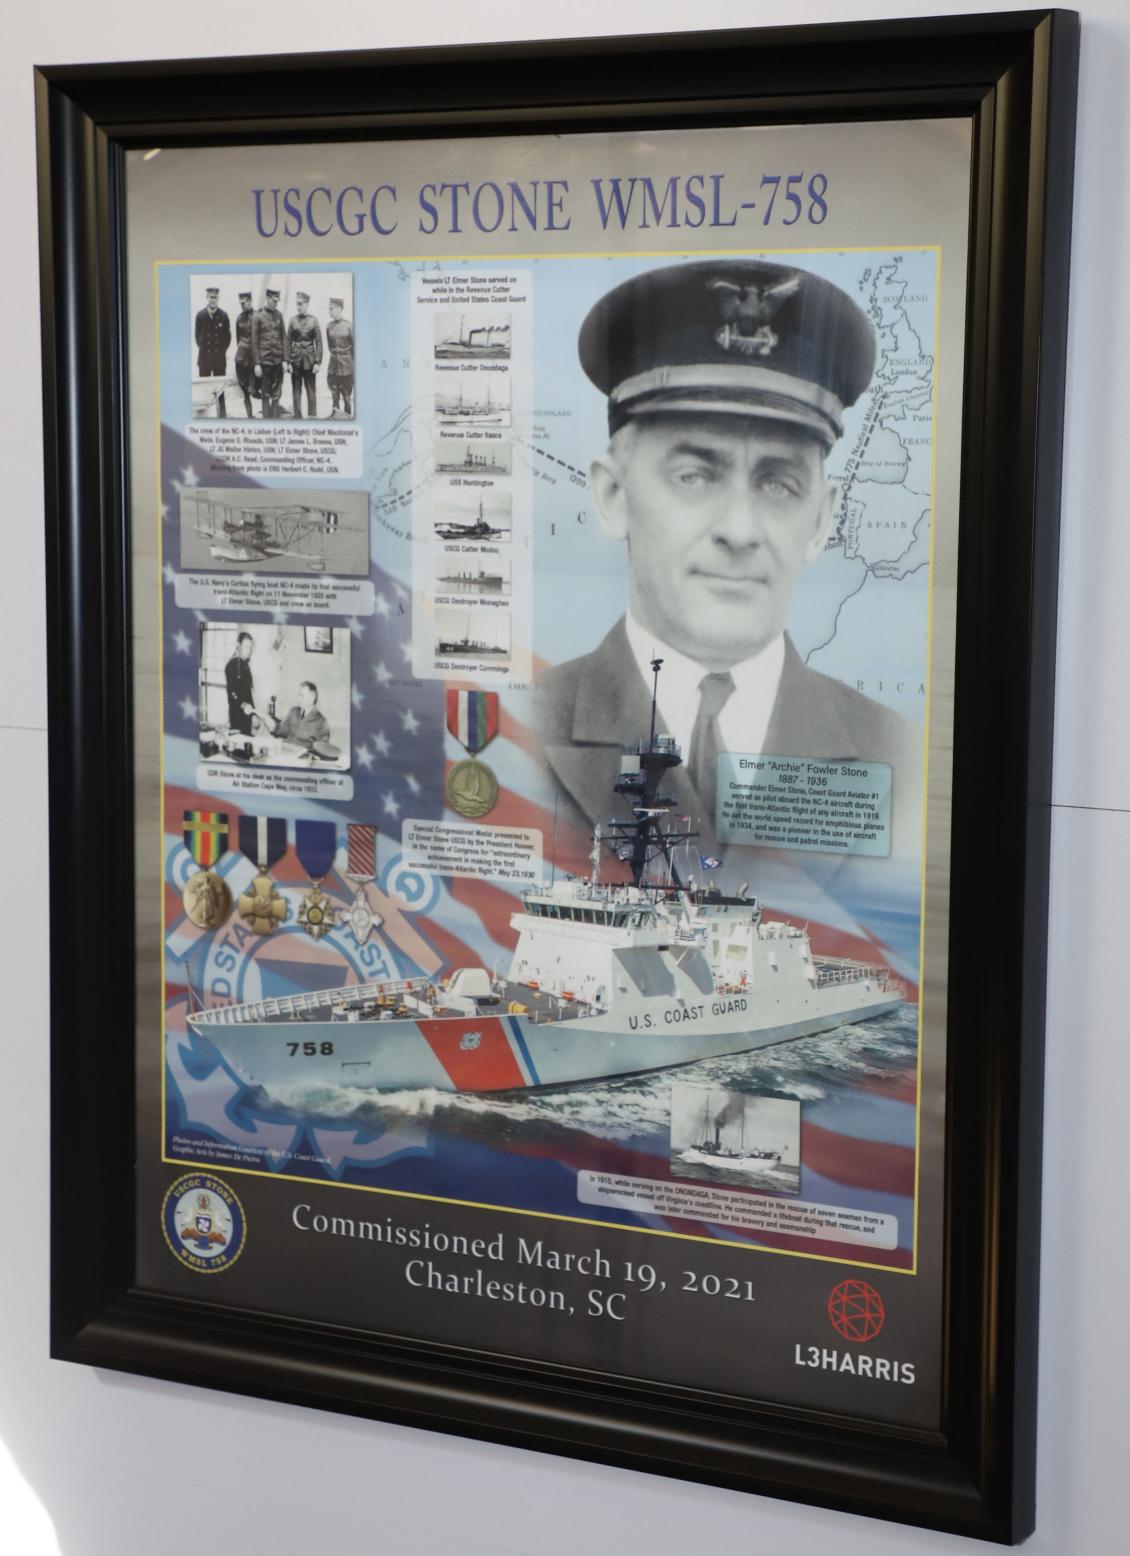 USCG Cutter Archie Stone Commissioned - Coast Guard Heritage Museum - Barnstable Massachusetts